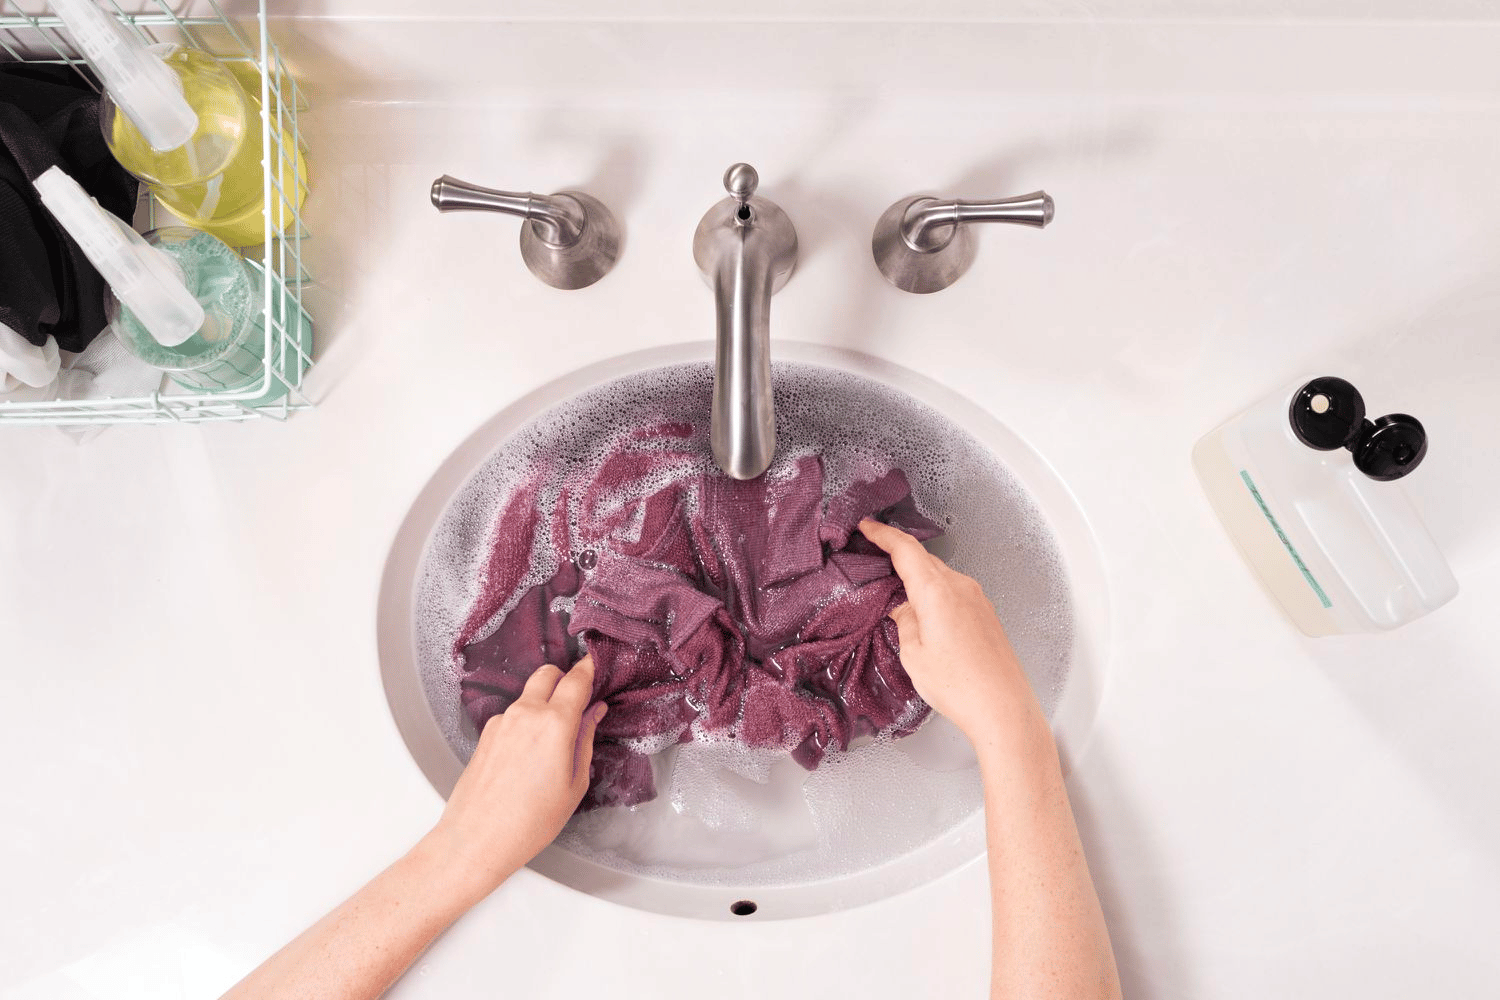 A shirt being washed in the sink